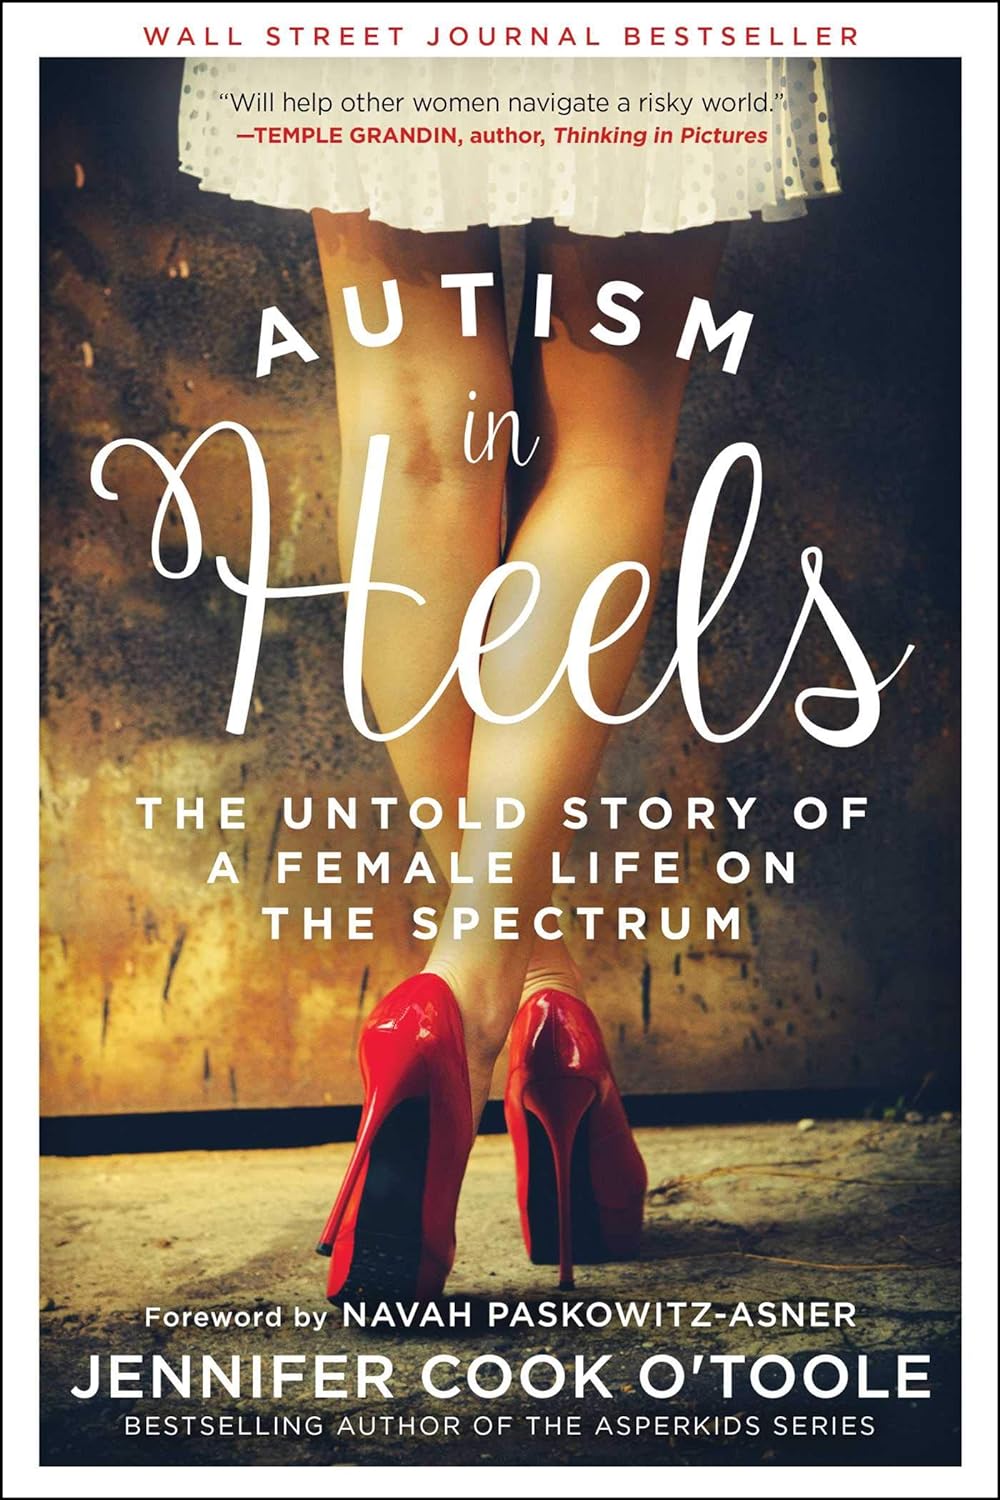 The cover of "Autism in Heels: The Untold Story of the Female Life on the Spectrum."